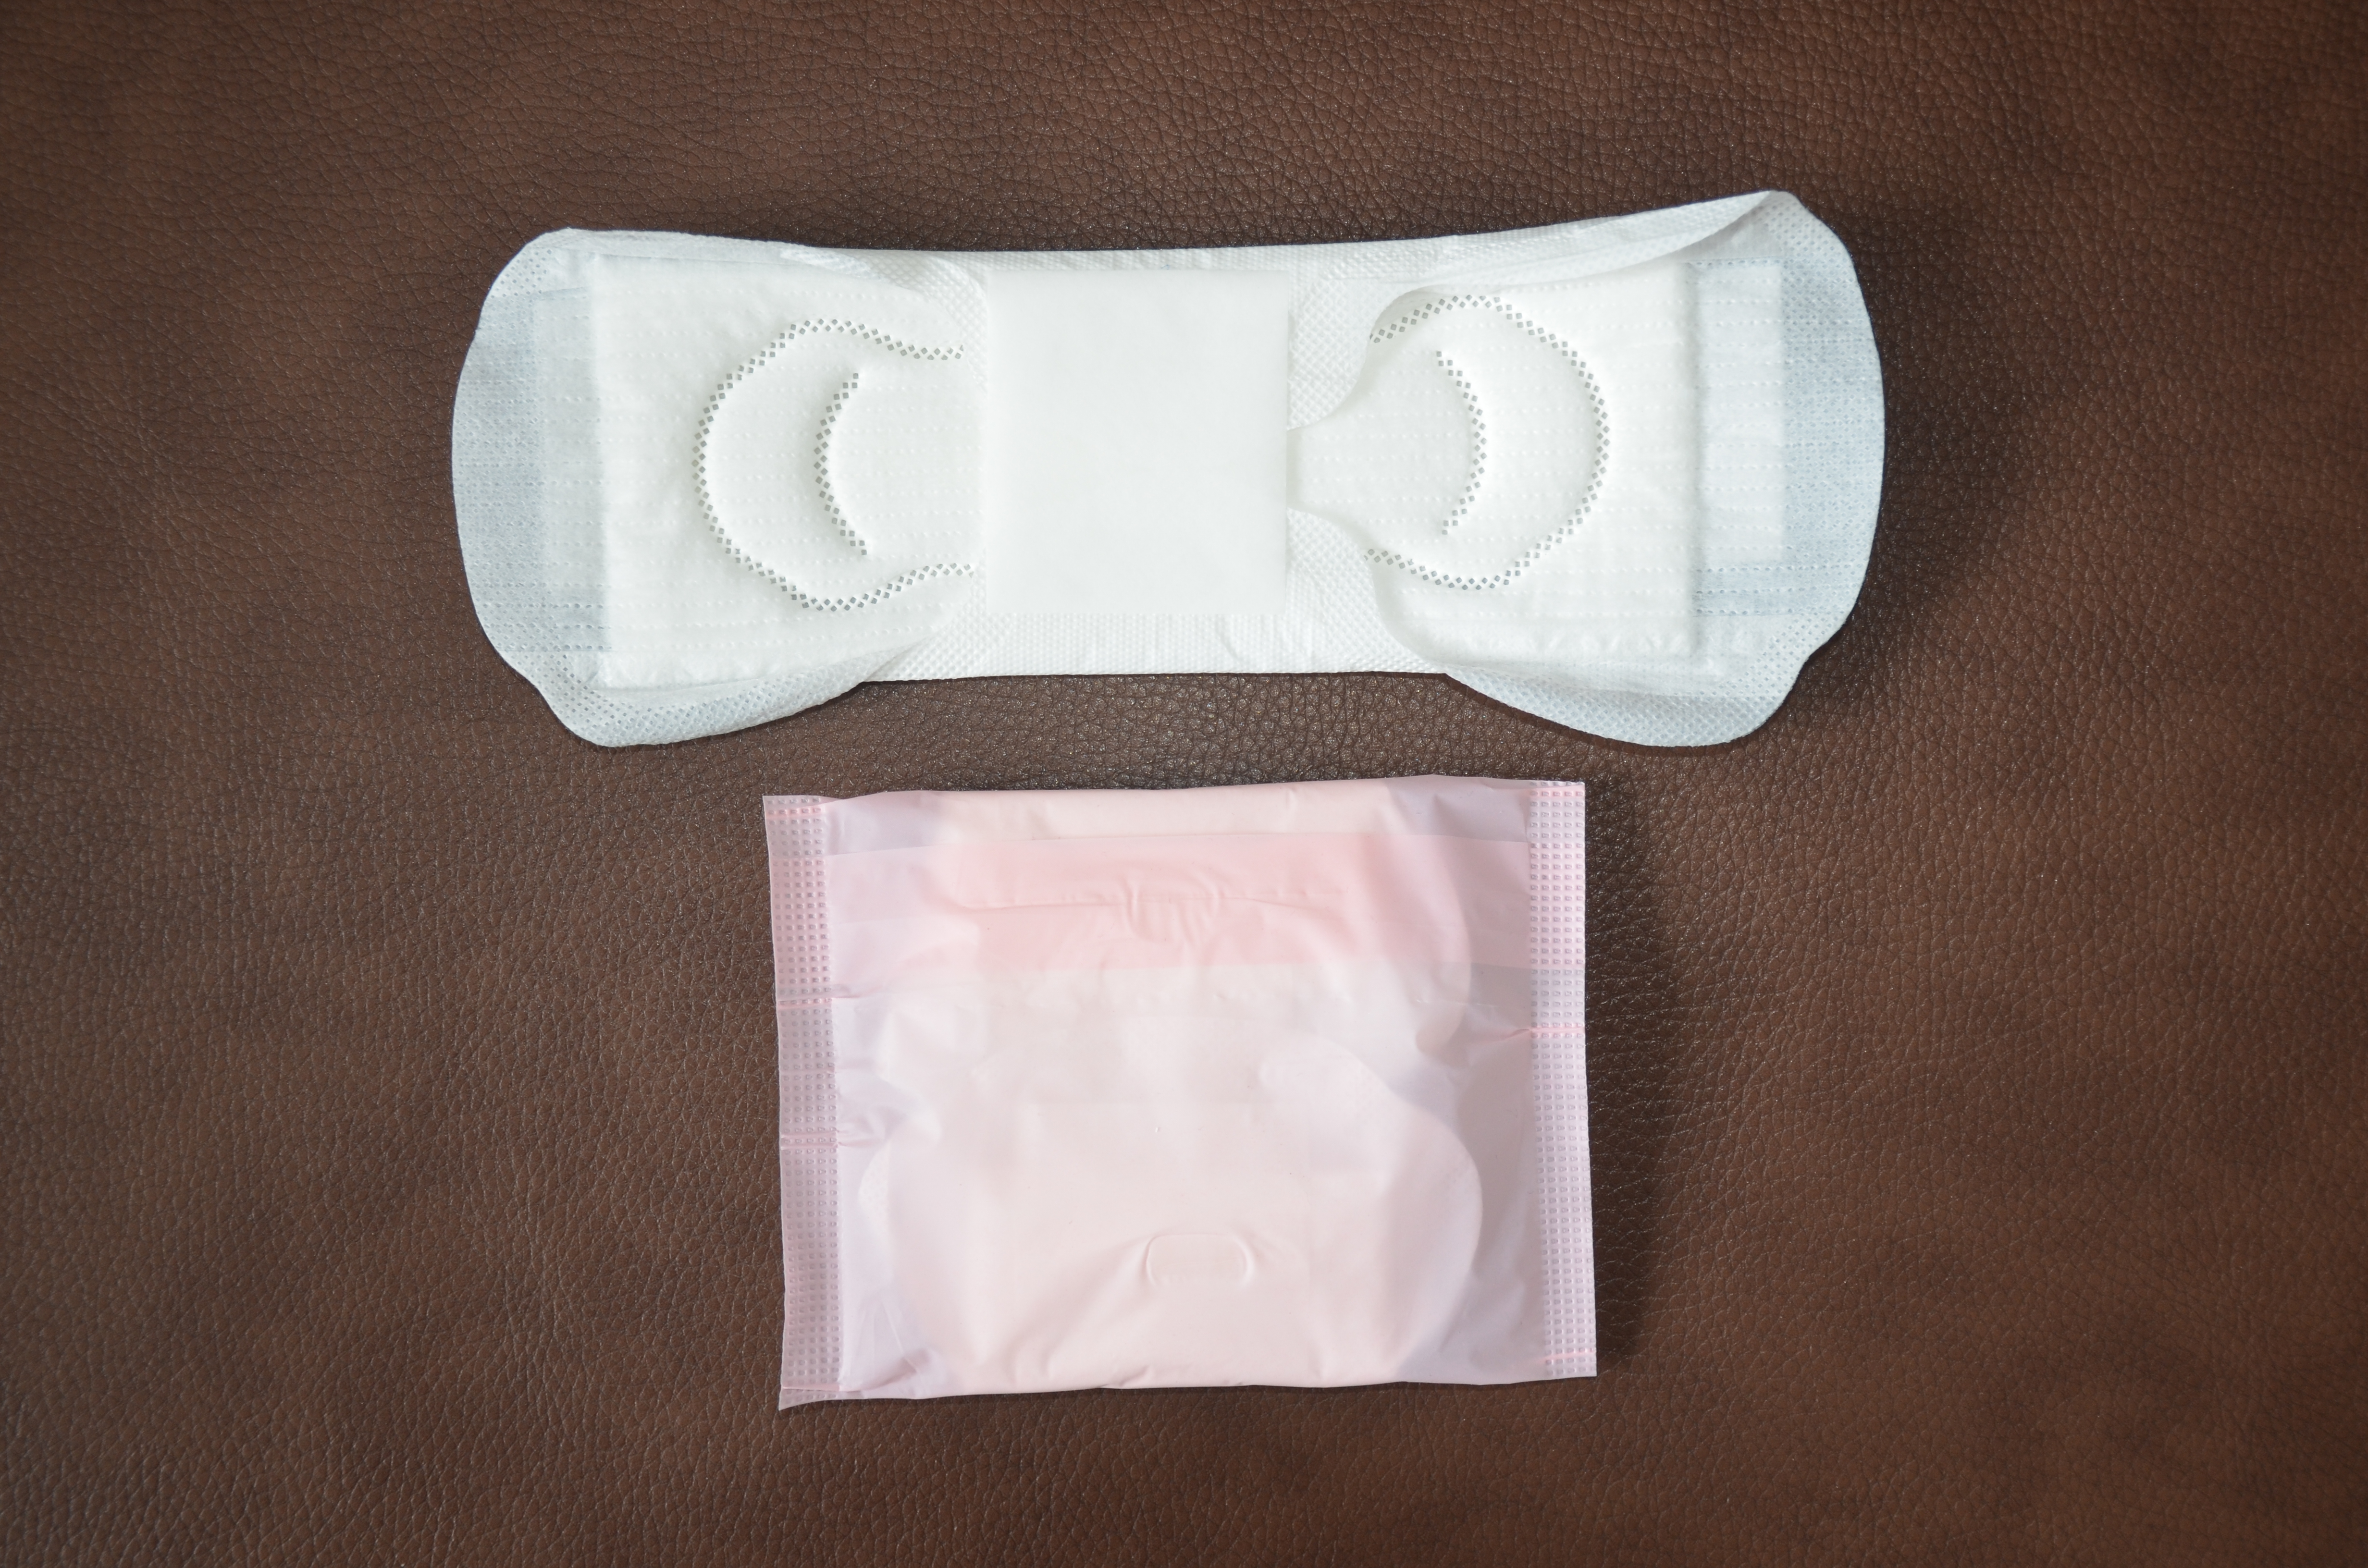 DAY TIME USE WHOLE Sanitary Pads Sanitary Napkin women pad Manufacturer OEM/ODM